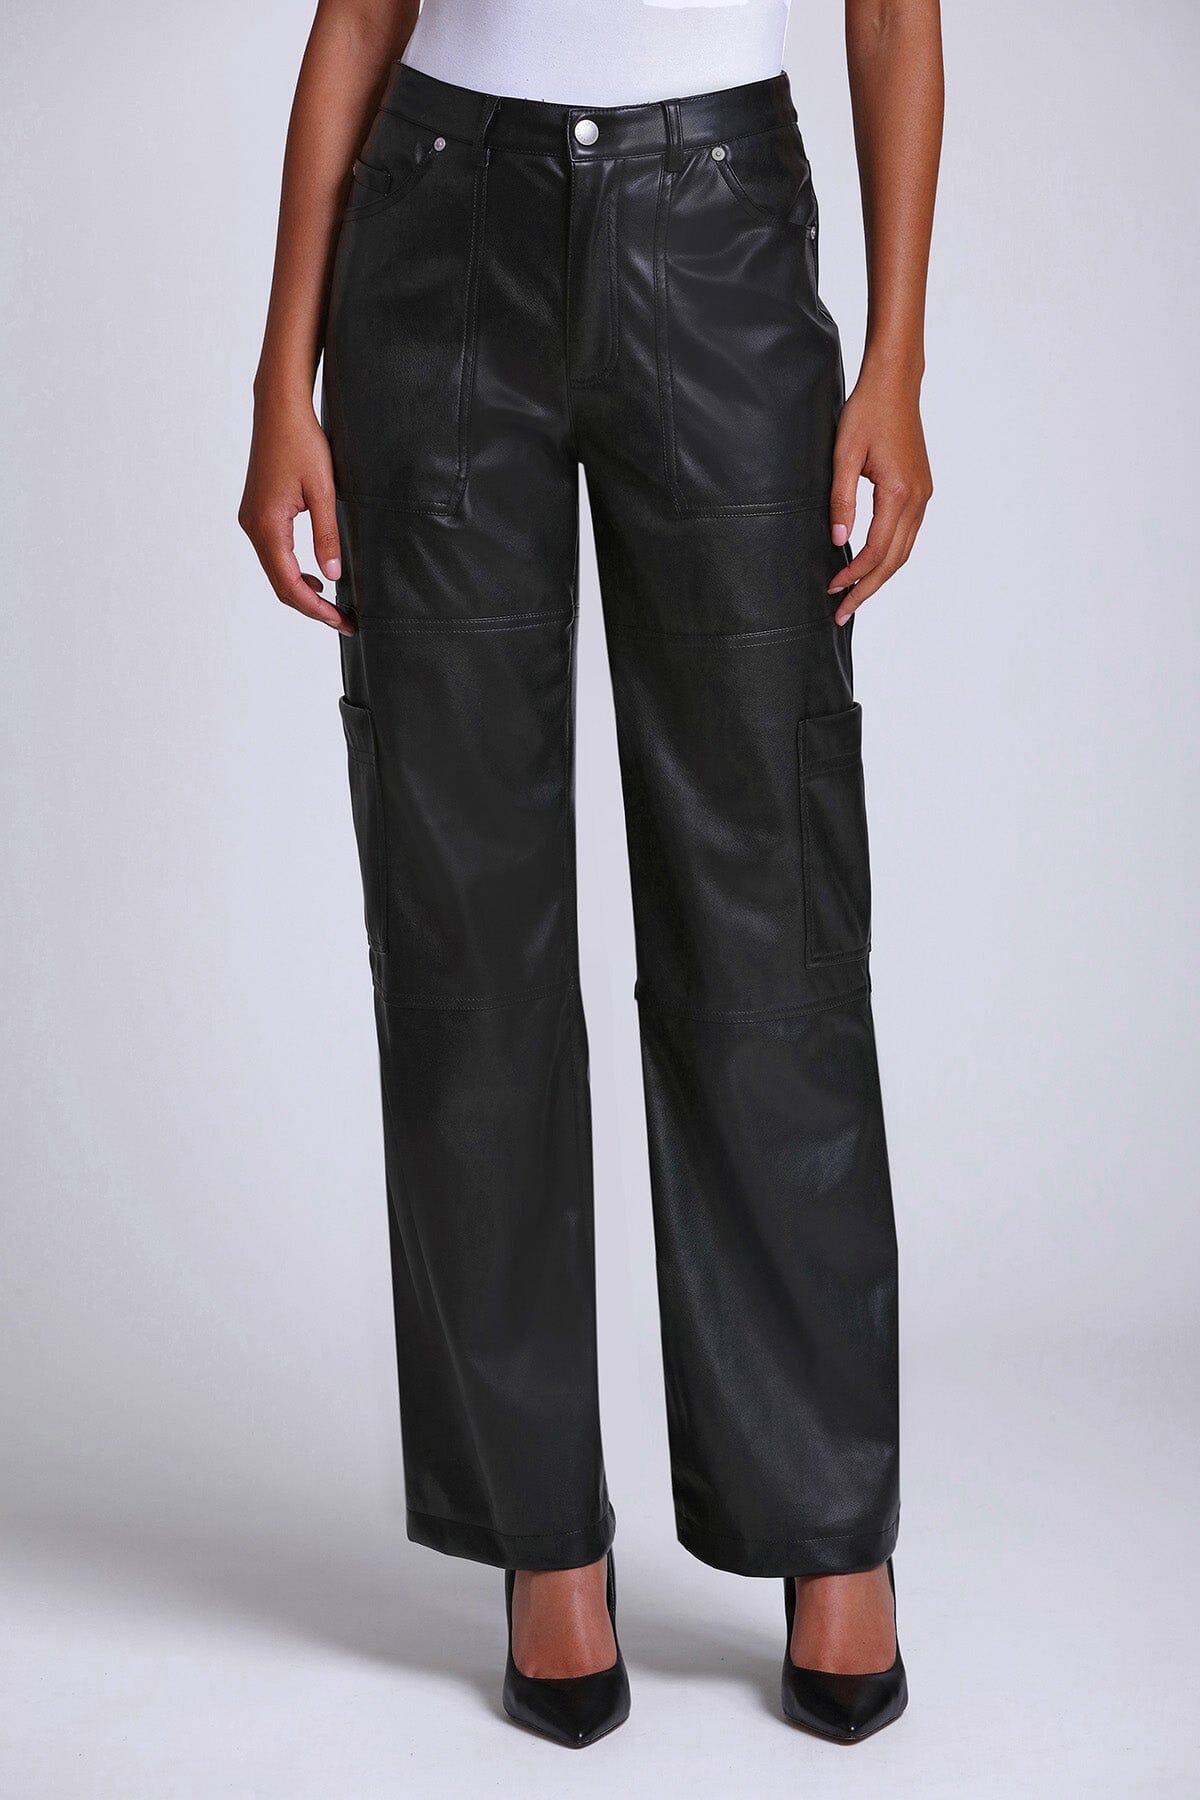 Tokito Recycled Blend Straight Leg Faux Leather Pants In Black  MYER